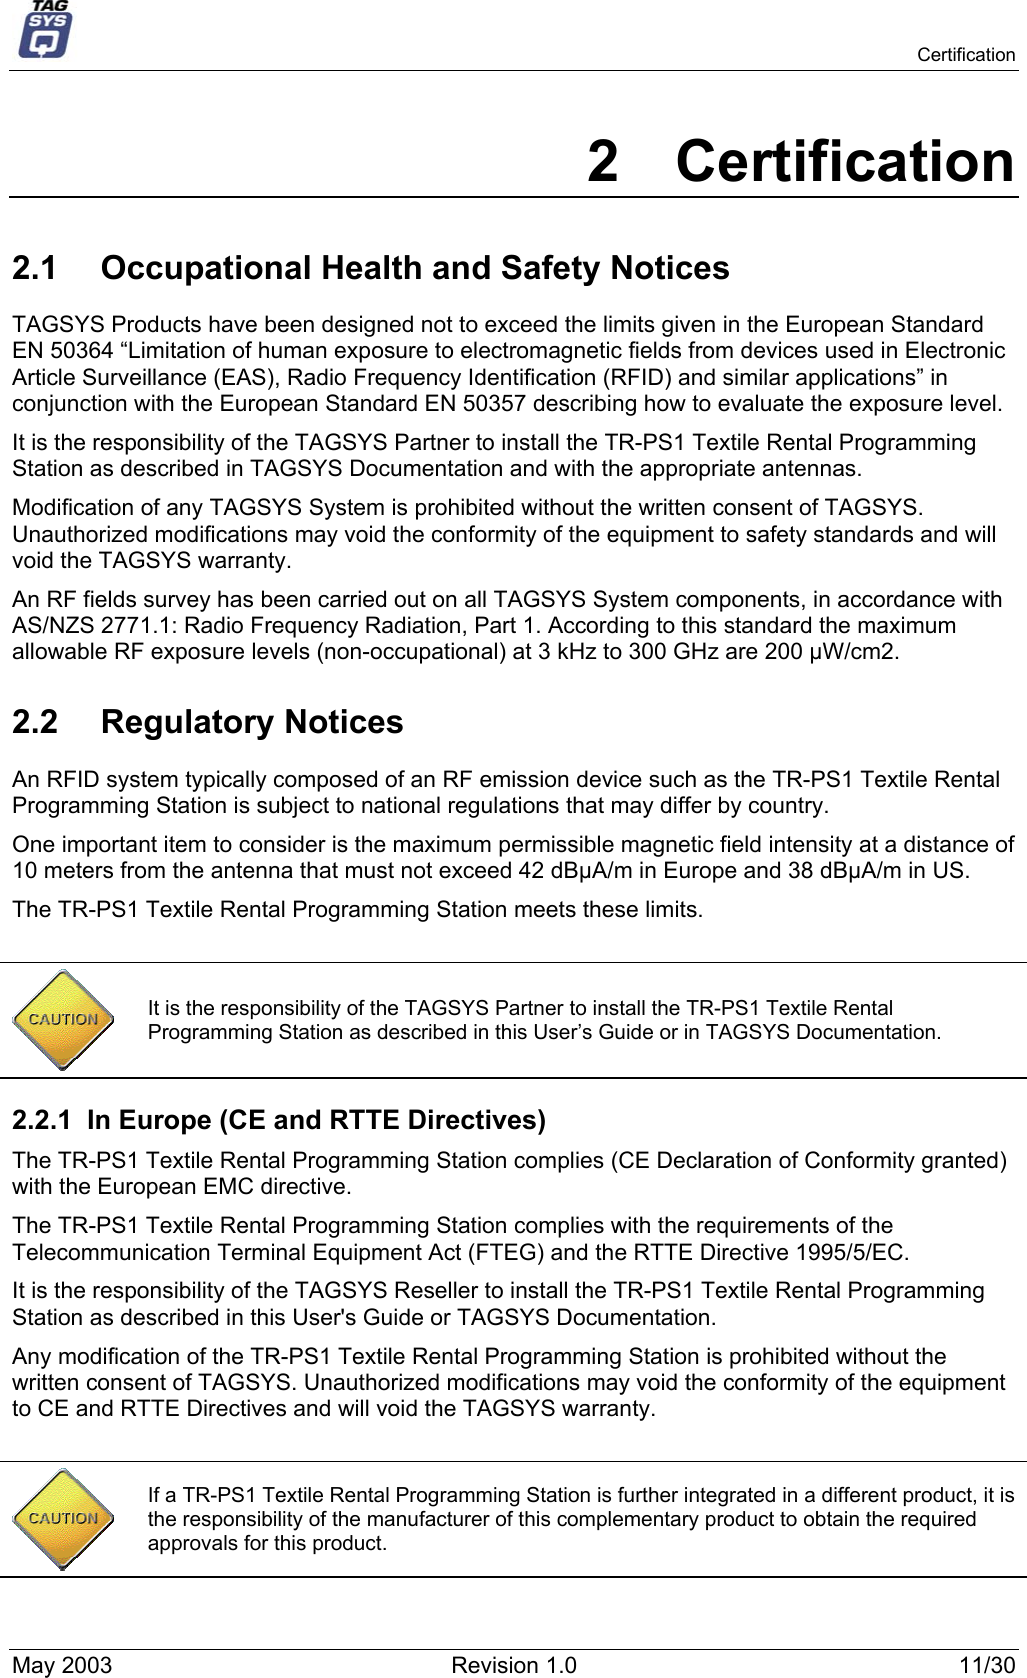   Certification 2 Certification 2.1  Occupational Health and Safety Notices TAGSYS Products have been designed not to exceed the limits given in the European Standard EN 50364 “Limitation of human exposure to electromagnetic fields from devices used in Electronic Article Surveillance (EAS), Radio Frequency Identification (RFID) and similar applications” in conjunction with the European Standard EN 50357 describing how to evaluate the exposure level. It is the responsibility of the TAGSYS Partner to install the TR-PS1 Textile Rental Programming Station as described in TAGSYS Documentation and with the appropriate antennas.  Modification of any TAGSYS System is prohibited without the written consent of TAGSYS. Unauthorized modifications may void the conformity of the equipment to safety standards and will void the TAGSYS warranty. An RF fields survey has been carried out on all TAGSYS System components, in accordance with AS/NZS 2771.1: Radio Frequency Radiation, Part 1. According to this standard the maximum allowable RF exposure levels (non-occupational) at 3 kHz to 300 GHz are 200 µW/cm2.  2.2 Regulatory Notices An RFID system typically composed of an RF emission device such as the TR-PS1 Textile Rental Programming Station is subject to national regulations that may differ by country. One important item to consider is the maximum permissible magnetic field intensity at a distance of 10 meters from the antenna that must not exceed 42 dBµA/m in Europe and 38 dBµA/m in US. The TR-PS1 Textile Rental Programming Station meets these limits.   It is the responsibility of the TAGSYS Partner to install the TR-PS1 Textile Rental Programming Station as described in this User’s Guide or in TAGSYS Documentation. 2.2.1  In Europe (CE and RTTE Directives)  The TR-PS1 Textile Rental Programming Station complies (CE Declaration of Conformity granted) with the European EMC directive. The TR-PS1 Textile Rental Programming Station complies with the requirements of the Telecommunication Terminal Equipment Act (FTEG) and the RTTE Directive 1995/5/EC. It is the responsibility of the TAGSYS Reseller to install the TR-PS1 Textile Rental Programming Station as described in this User&apos;s Guide or TAGSYS Documentation. Any modification of the TR-PS1 Textile Rental Programming Station is prohibited without the written consent of TAGSYS. Unauthorized modifications may void the conformity of the equipment to CE and RTTE Directives and will void the TAGSYS warranty.   If a TR-PS1 Textile Rental Programming Station is further integrated in a different product, it is the responsibility of the manufacturer of this complementary product to obtain the required approvals for this product. May 2003  Revision 1.0  11/30 